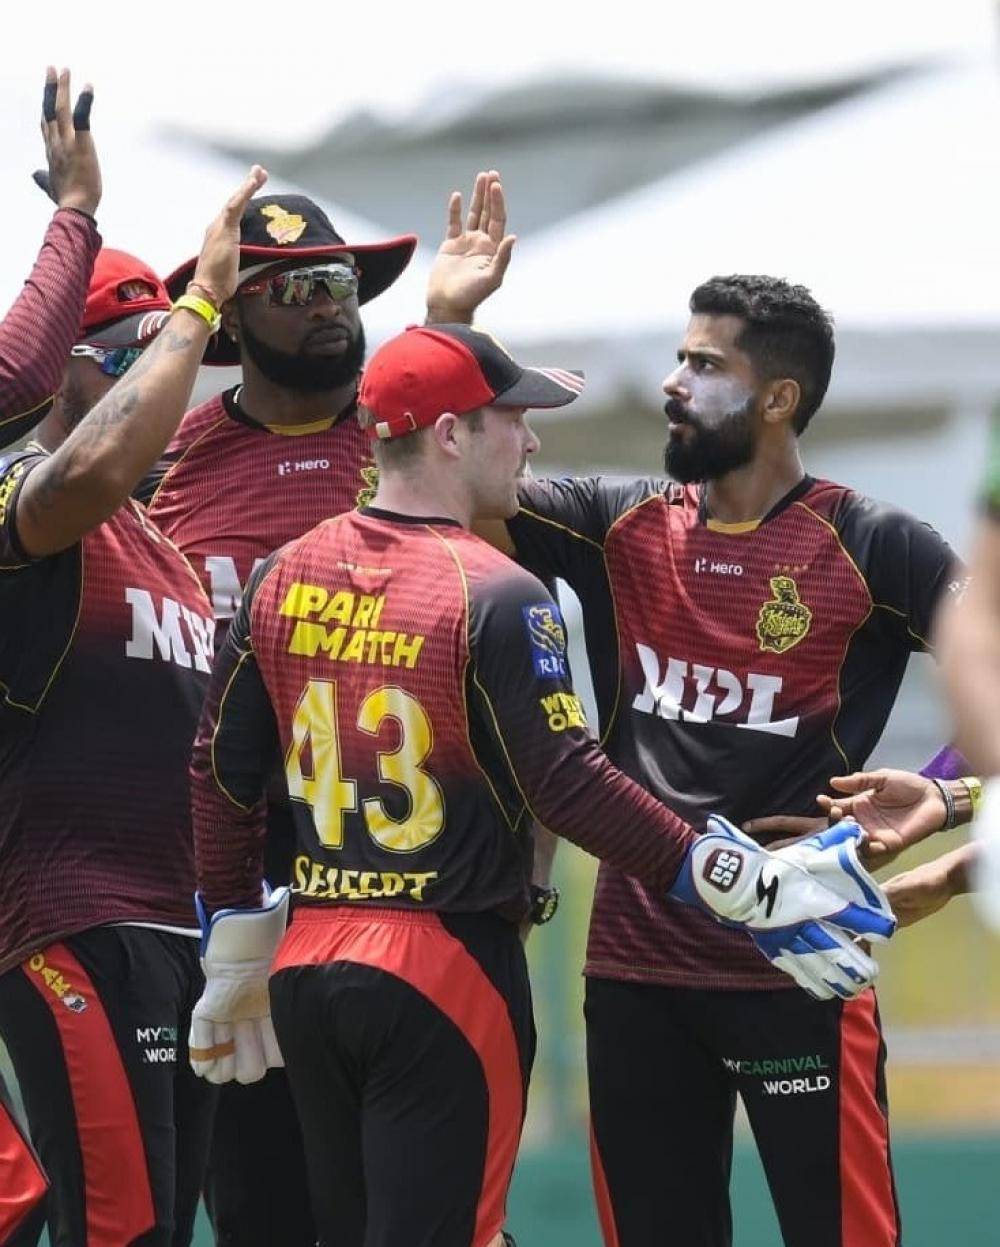 The Weekend Leader - CPL 2021: Trinbago Knight Riders join St. Kitts and Nevis in top spot